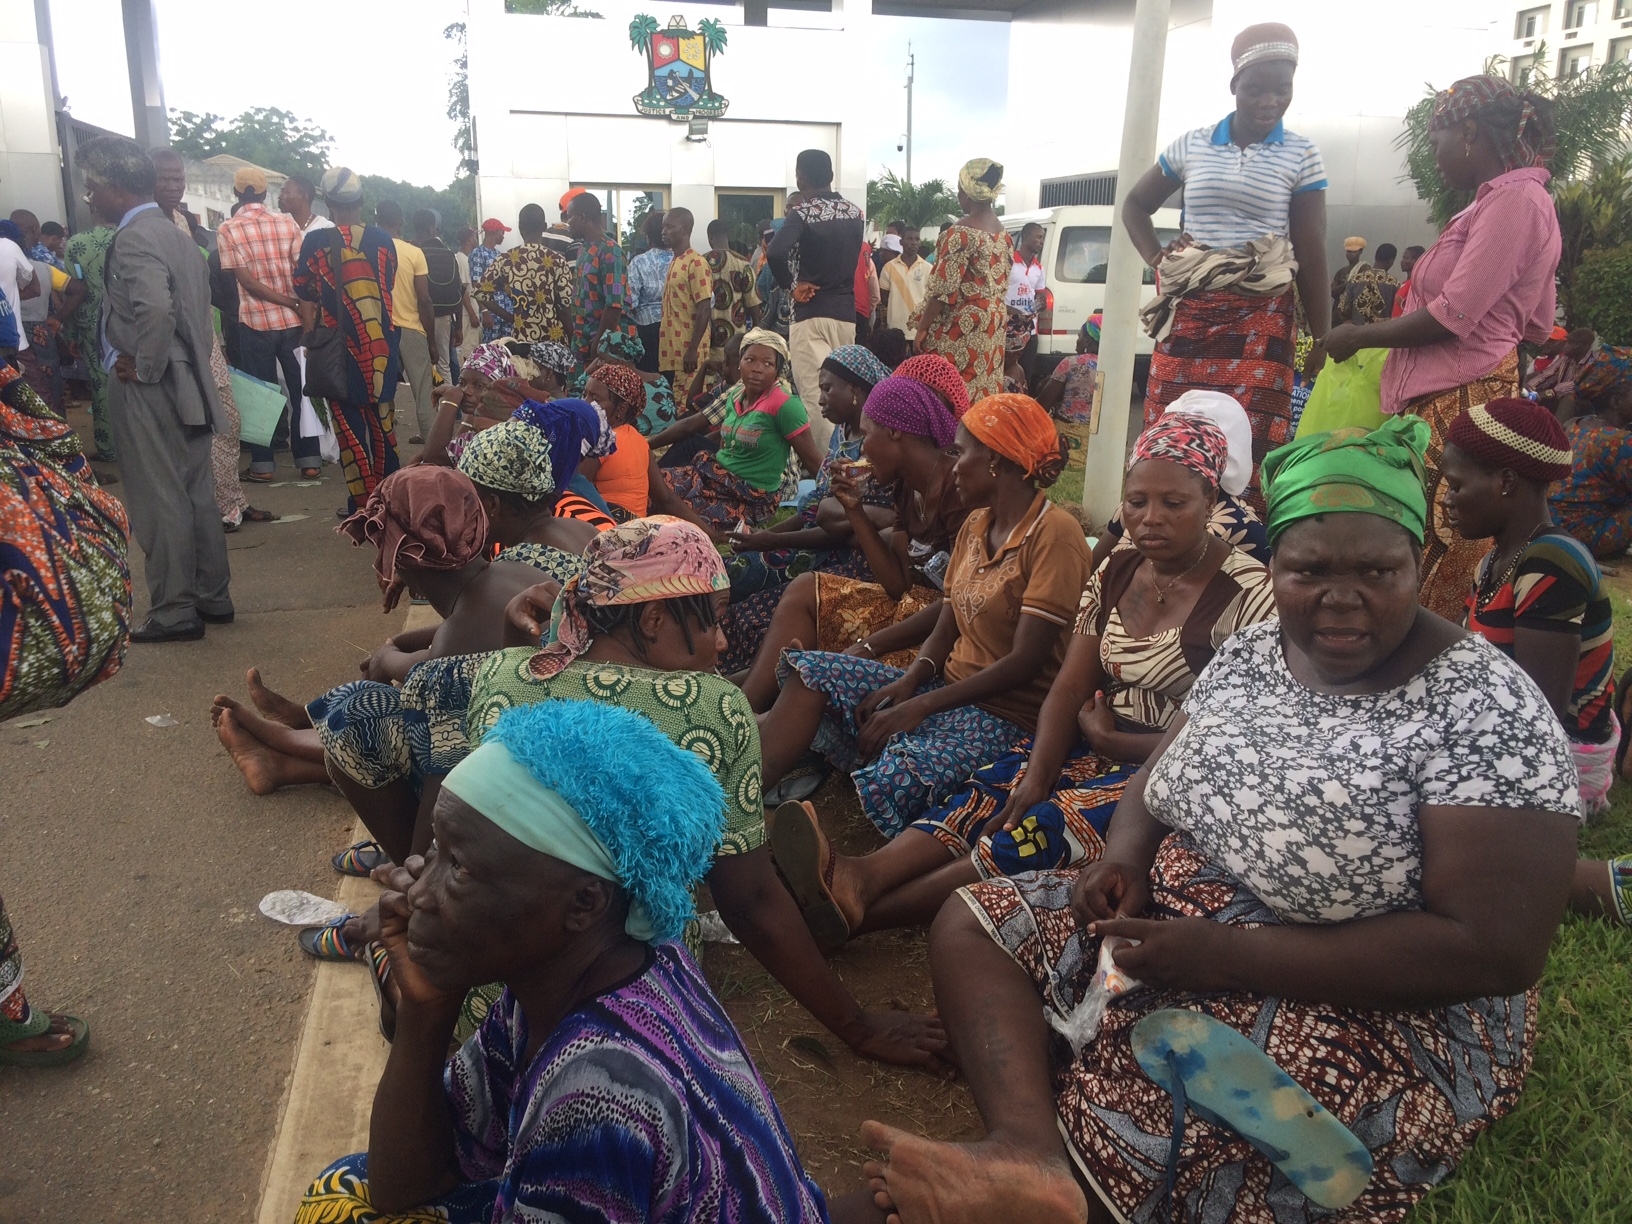  On Day 1 of #SavetheWaterfront protests in Lagos, hundreds from affected communities wait outside Governor's office 